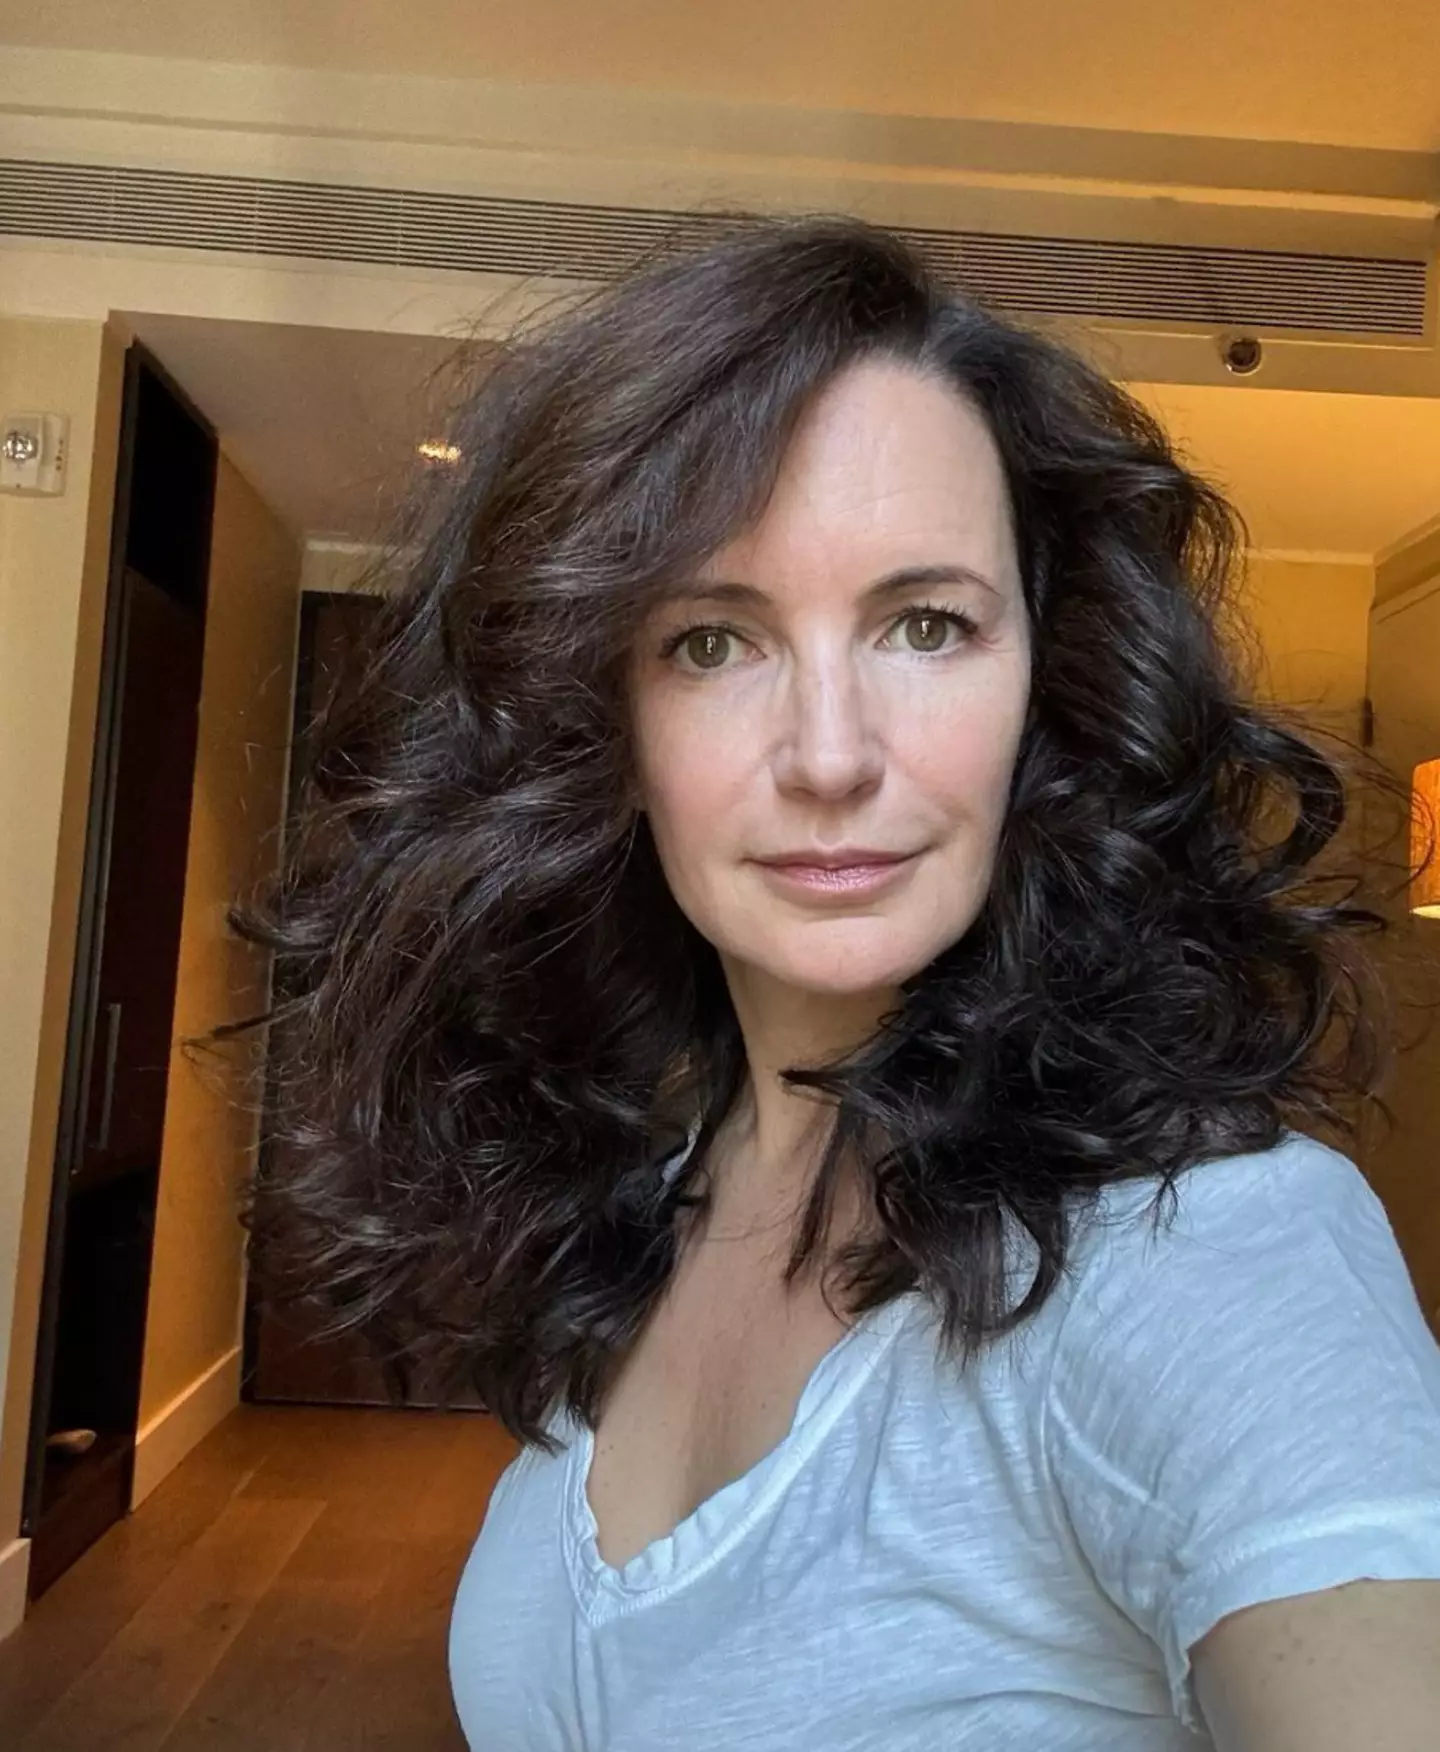 After sharing a snap of herself without makeup on her Instagram page at the start of May, her fans praised her appearance. (Kristin Davis/ Instagram)